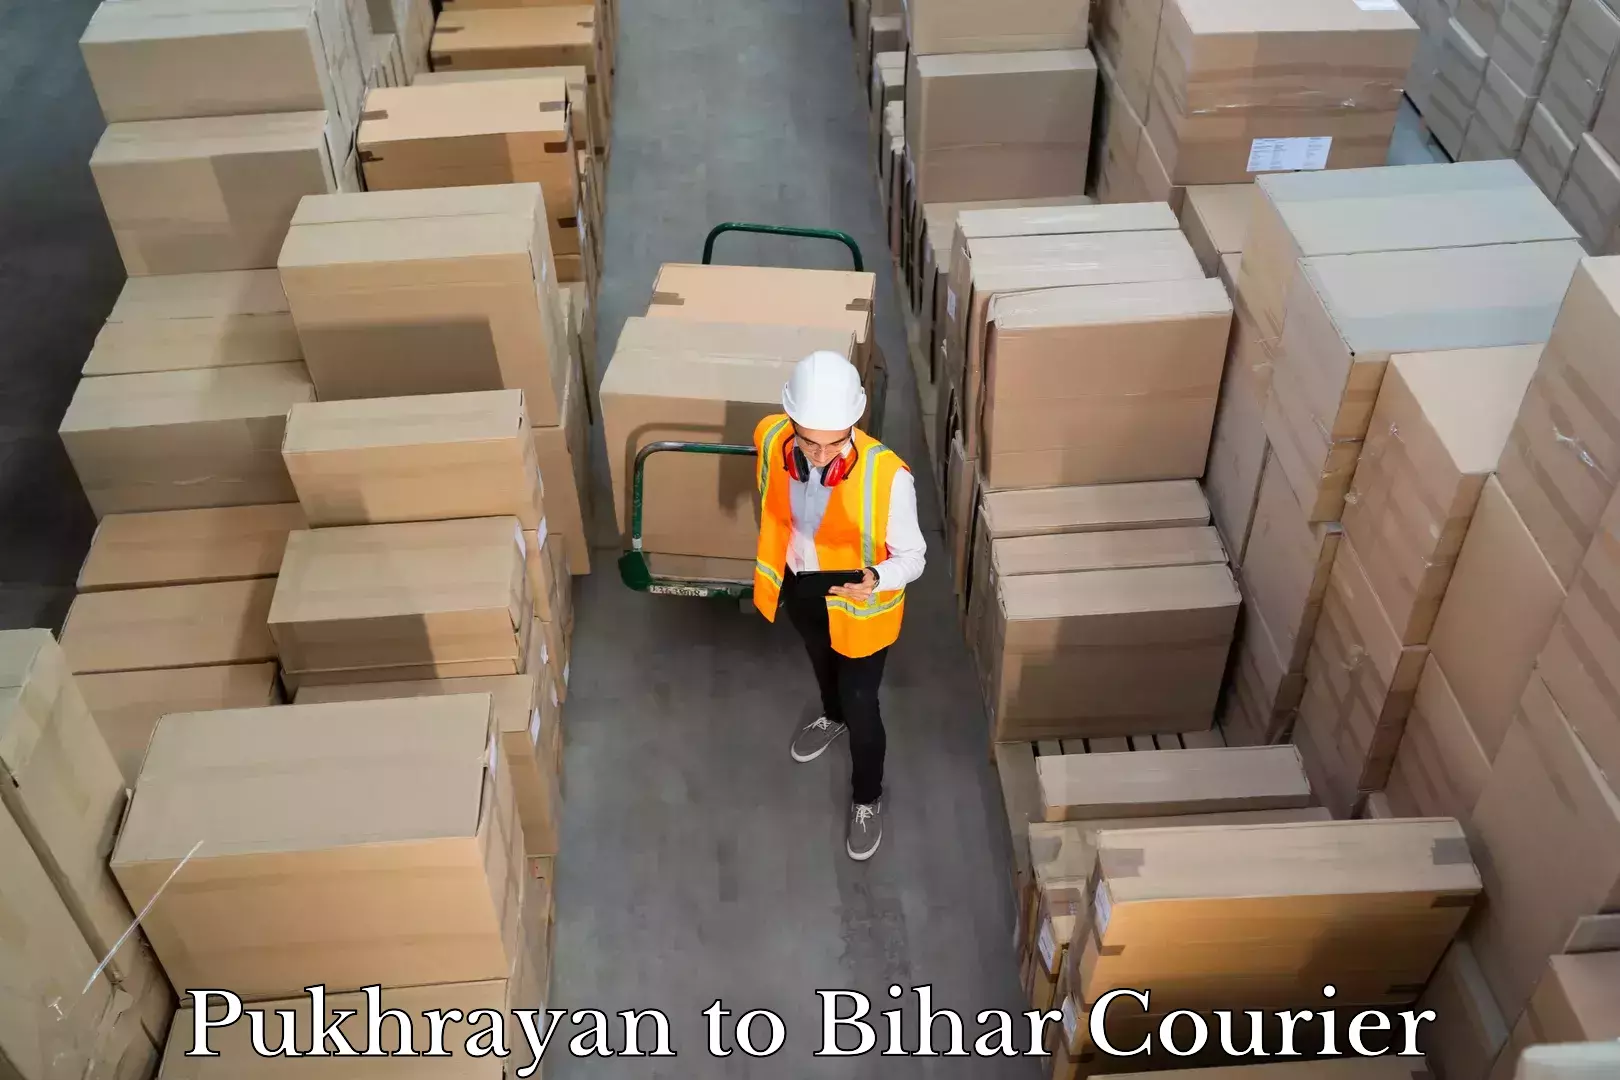 Luggage shipment processing in Pukhrayan to Buxar